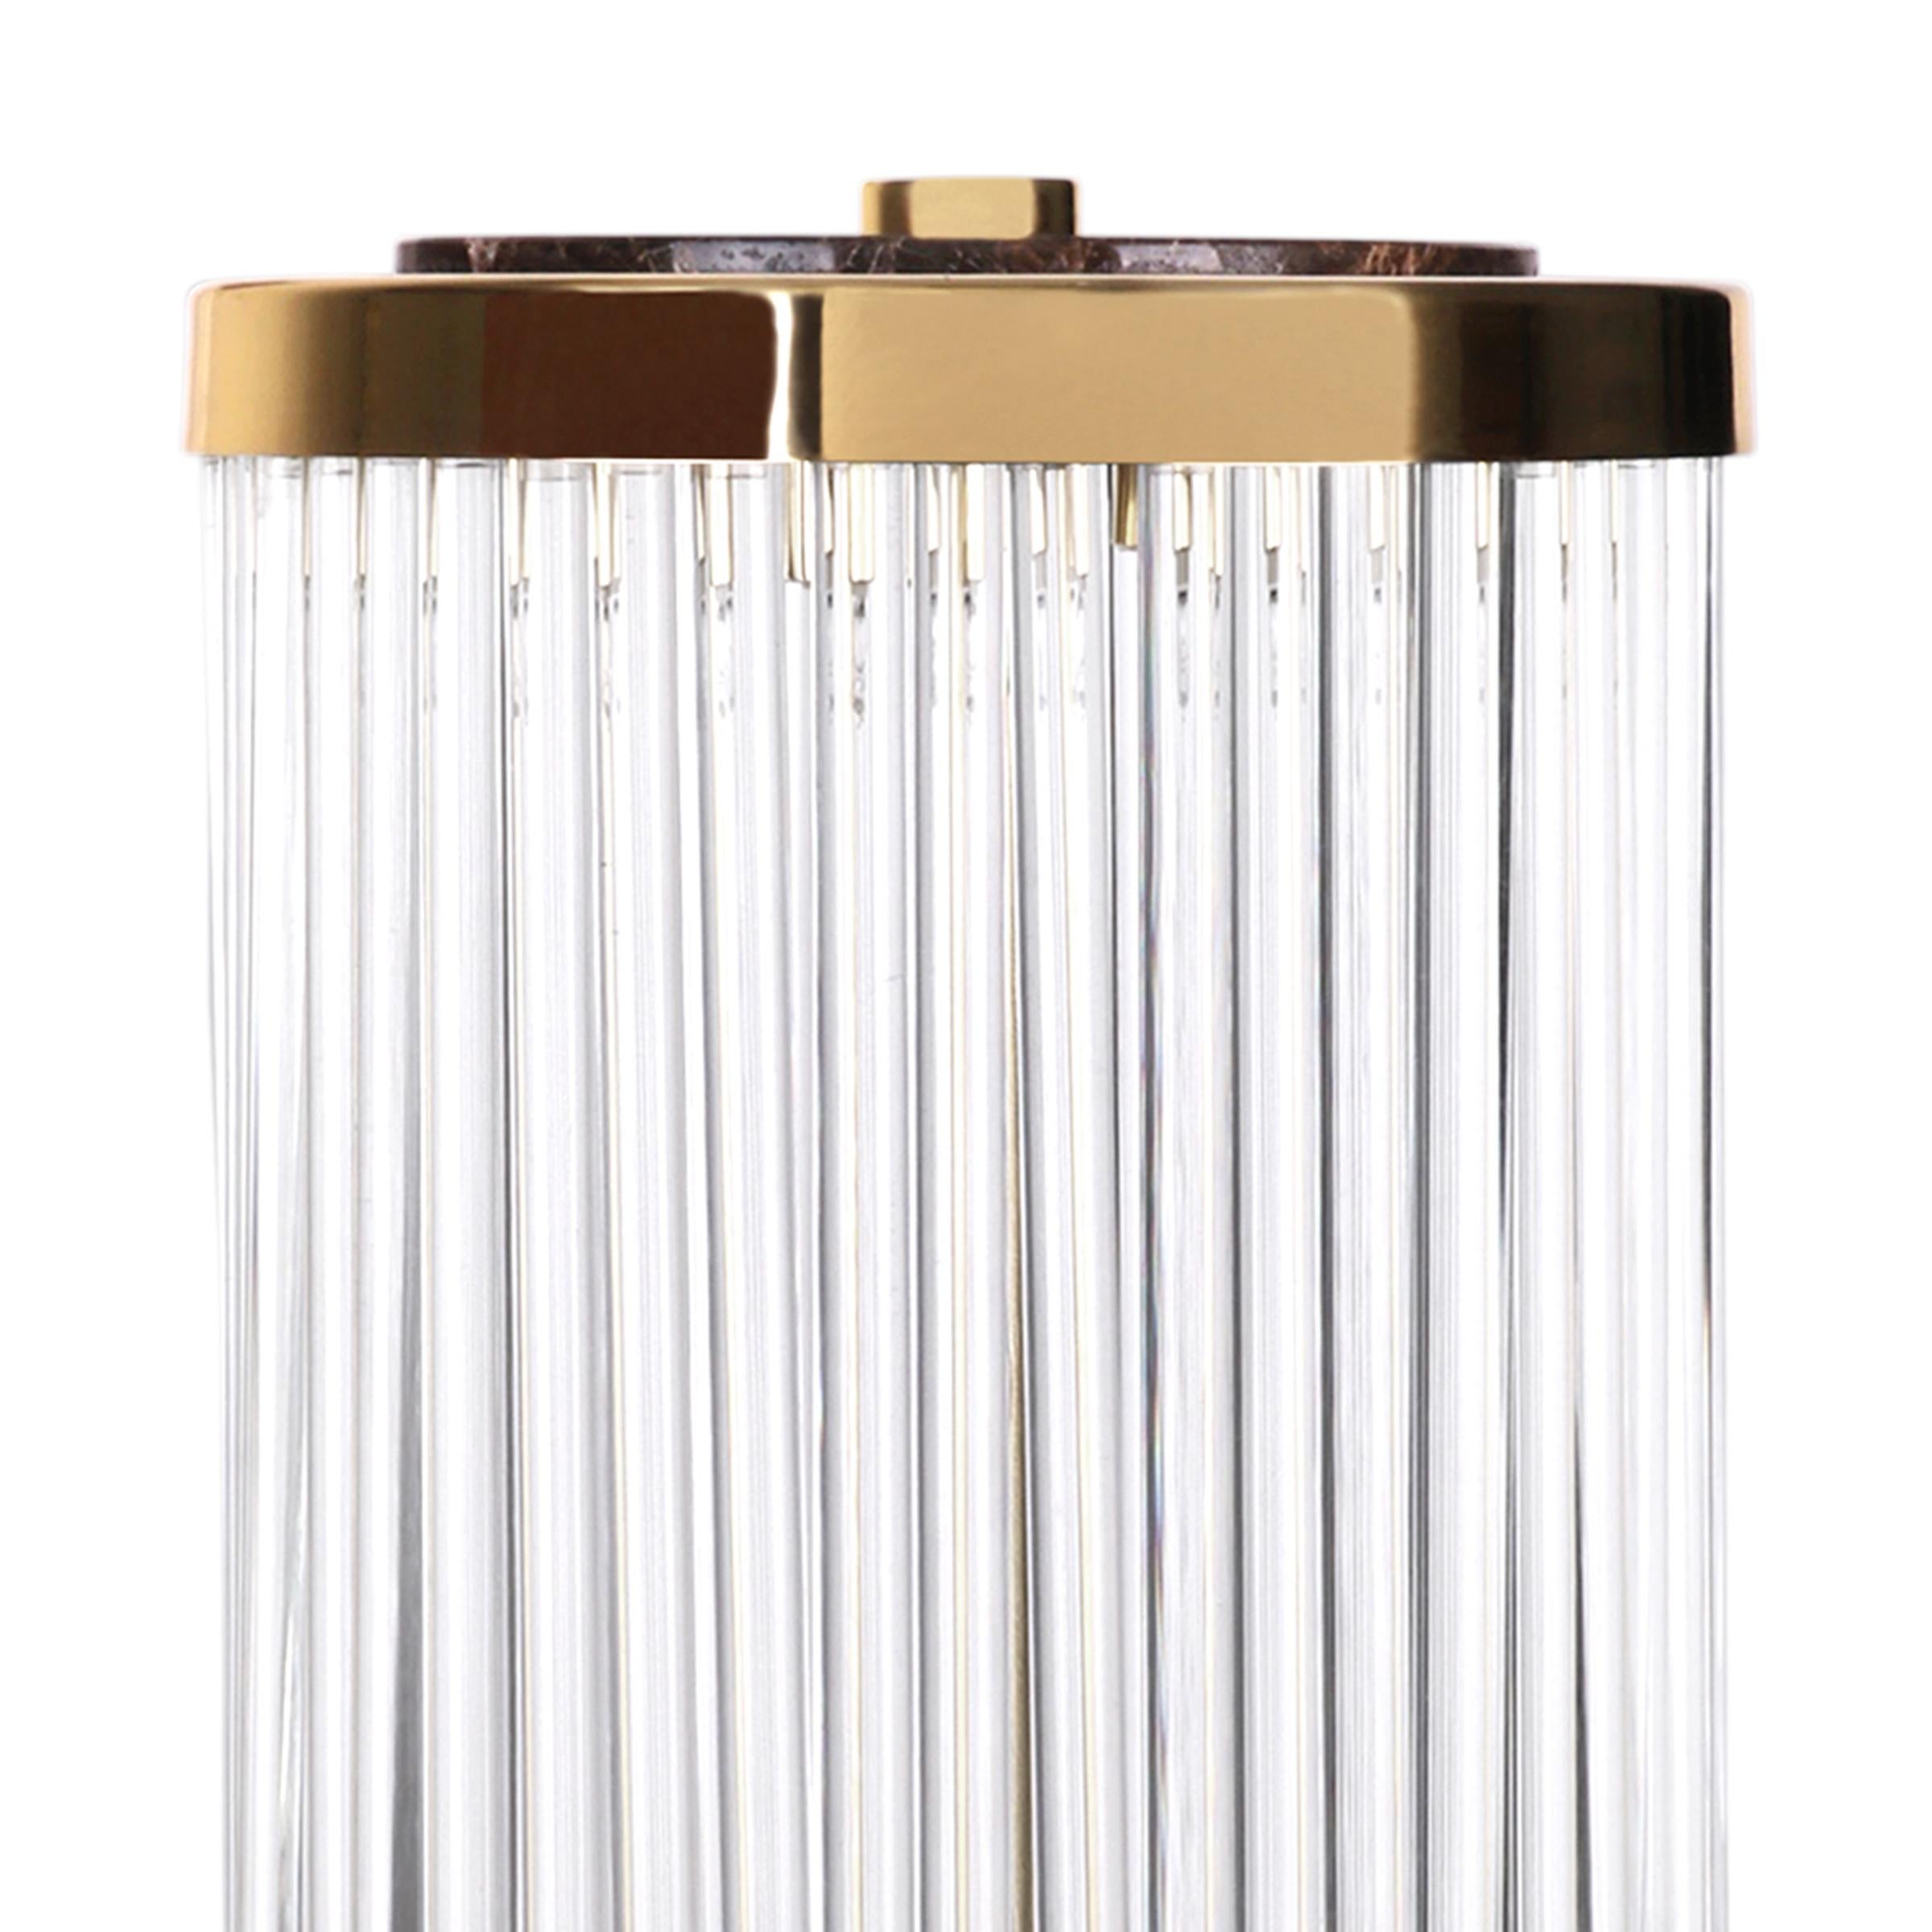 Table lamp highlight brass large with solid polished
brass structure and with crystal glass sticks. Base
made with brown marble.
6 bulbs, lamp holder type g9 halogen, max 40 watt,
voltage: 220-240V. Bulbs not included.